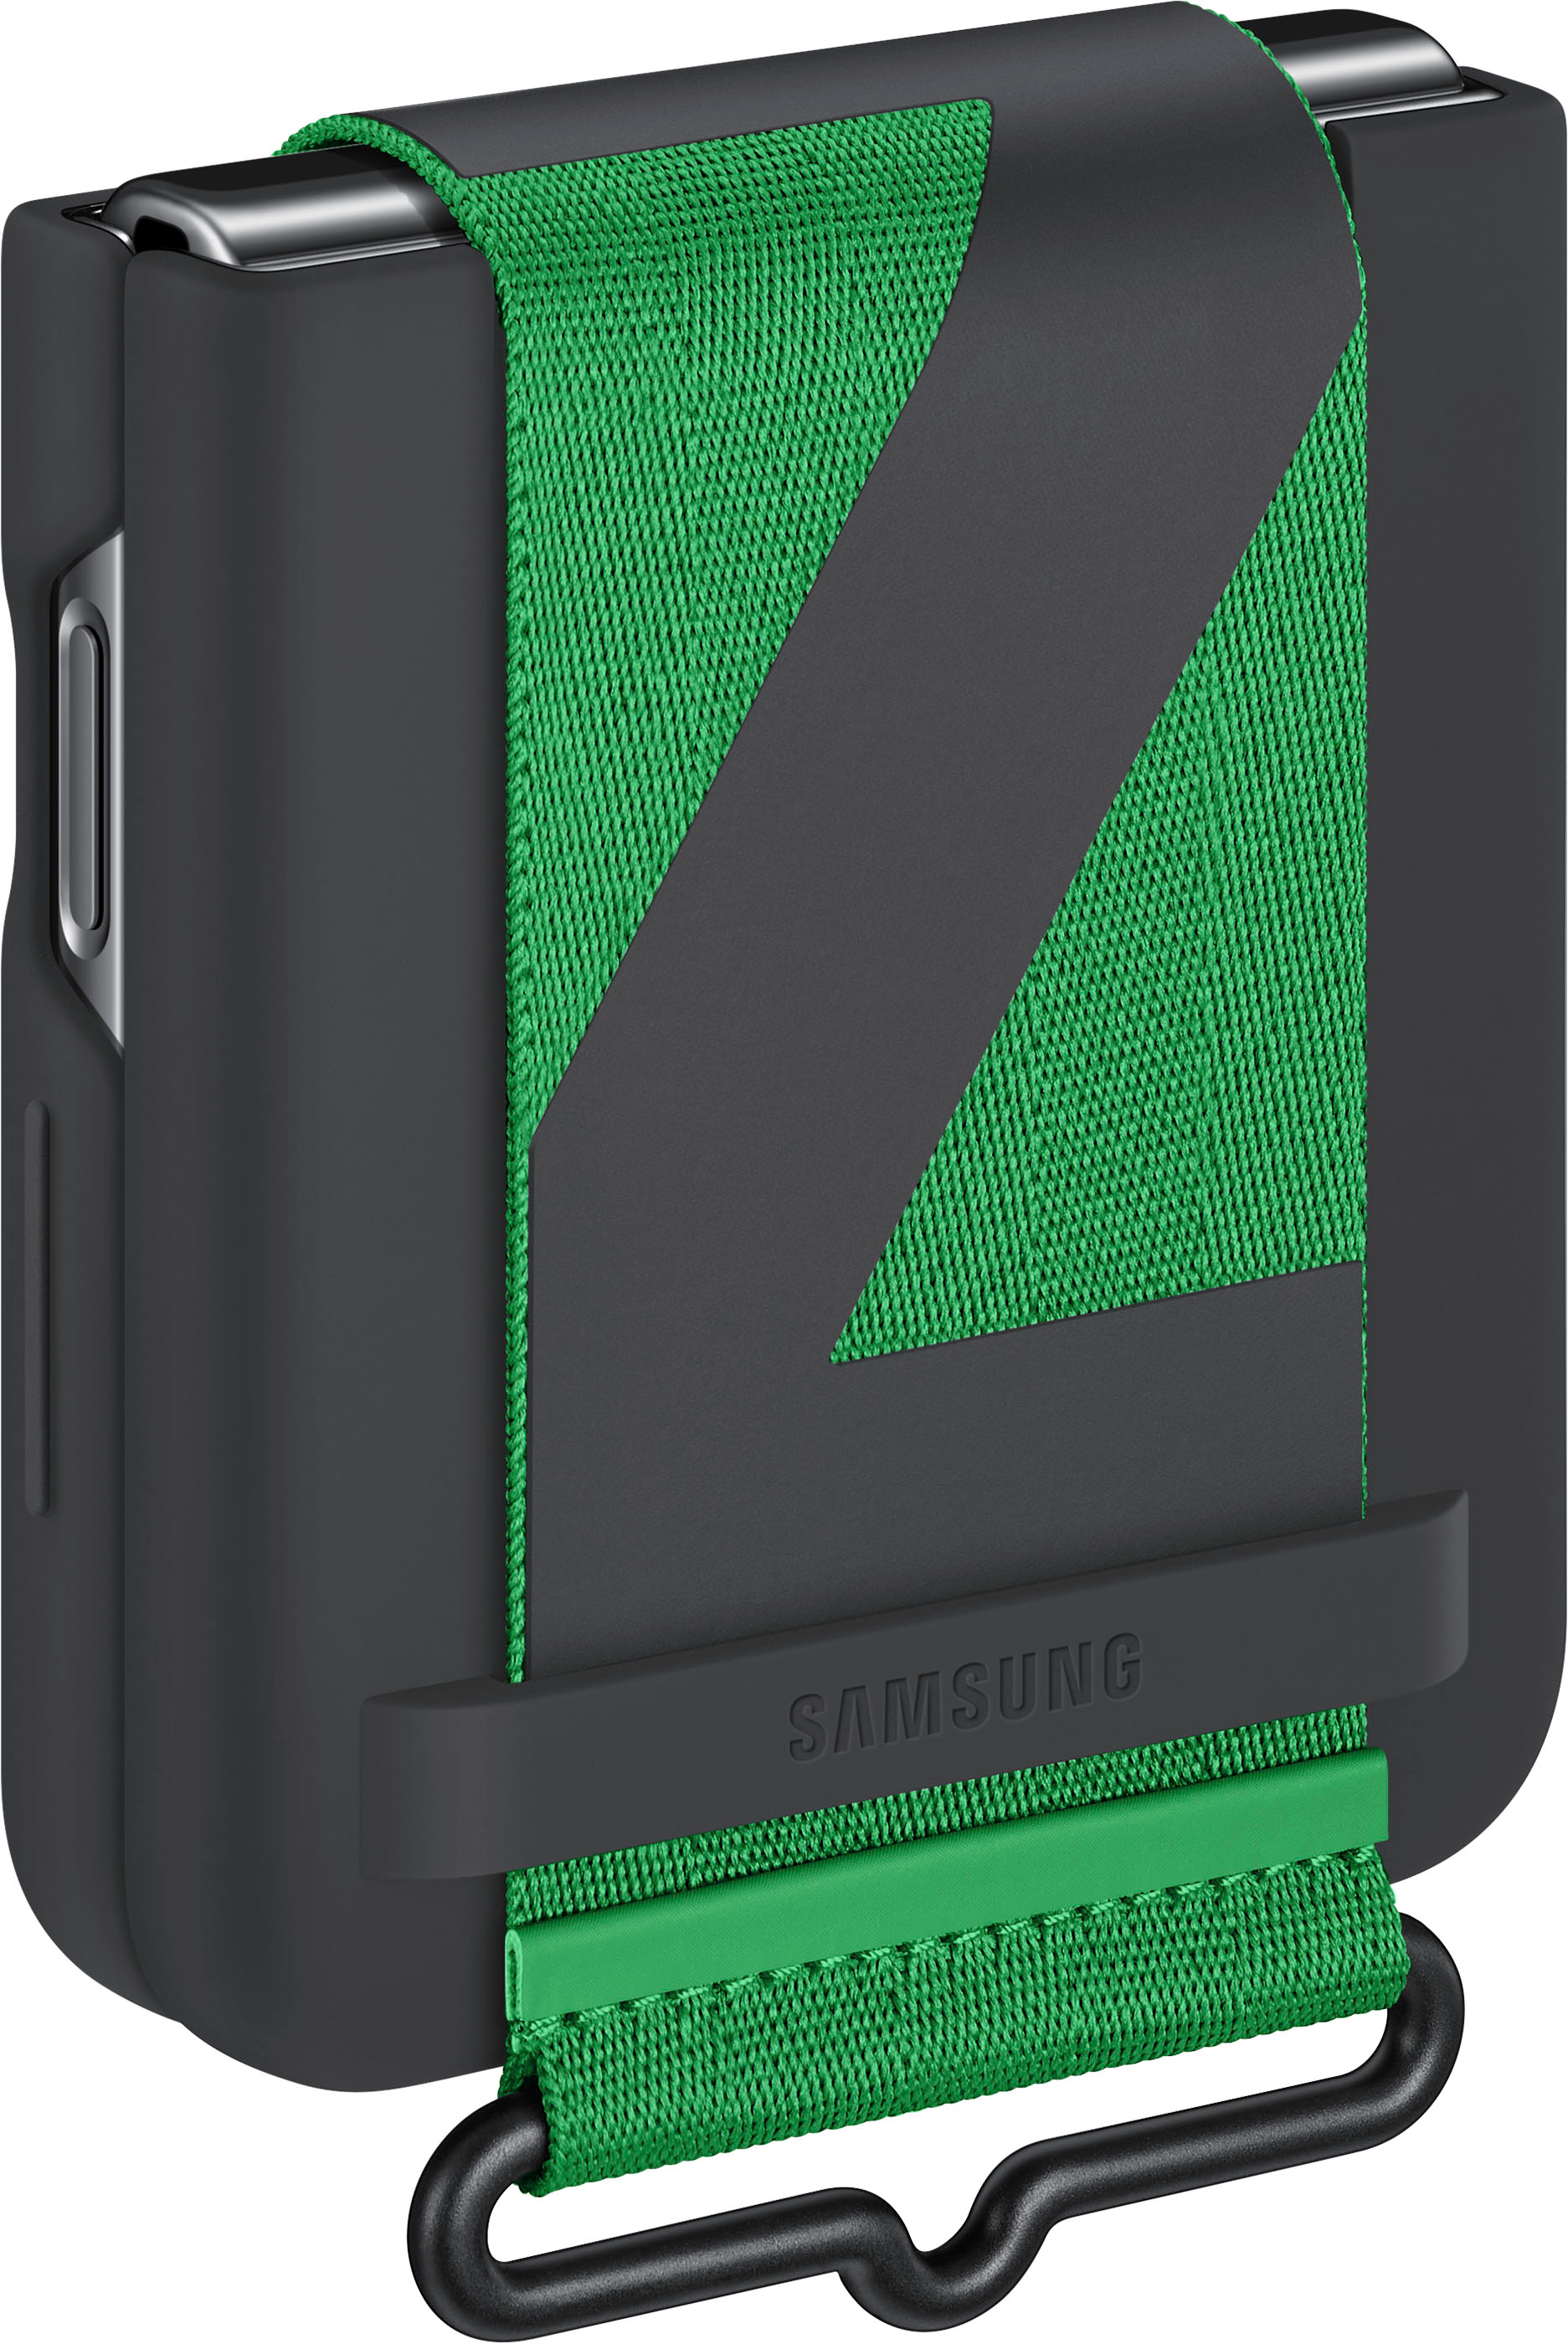 BRAND SET Galaxy Z Flip 4 Case, Samsung Z Flip 4 Case with Leather Strap  Wrist and Built-in Small Screen Shell Film, Galaxy Z Flip 4 Case Suitable  for